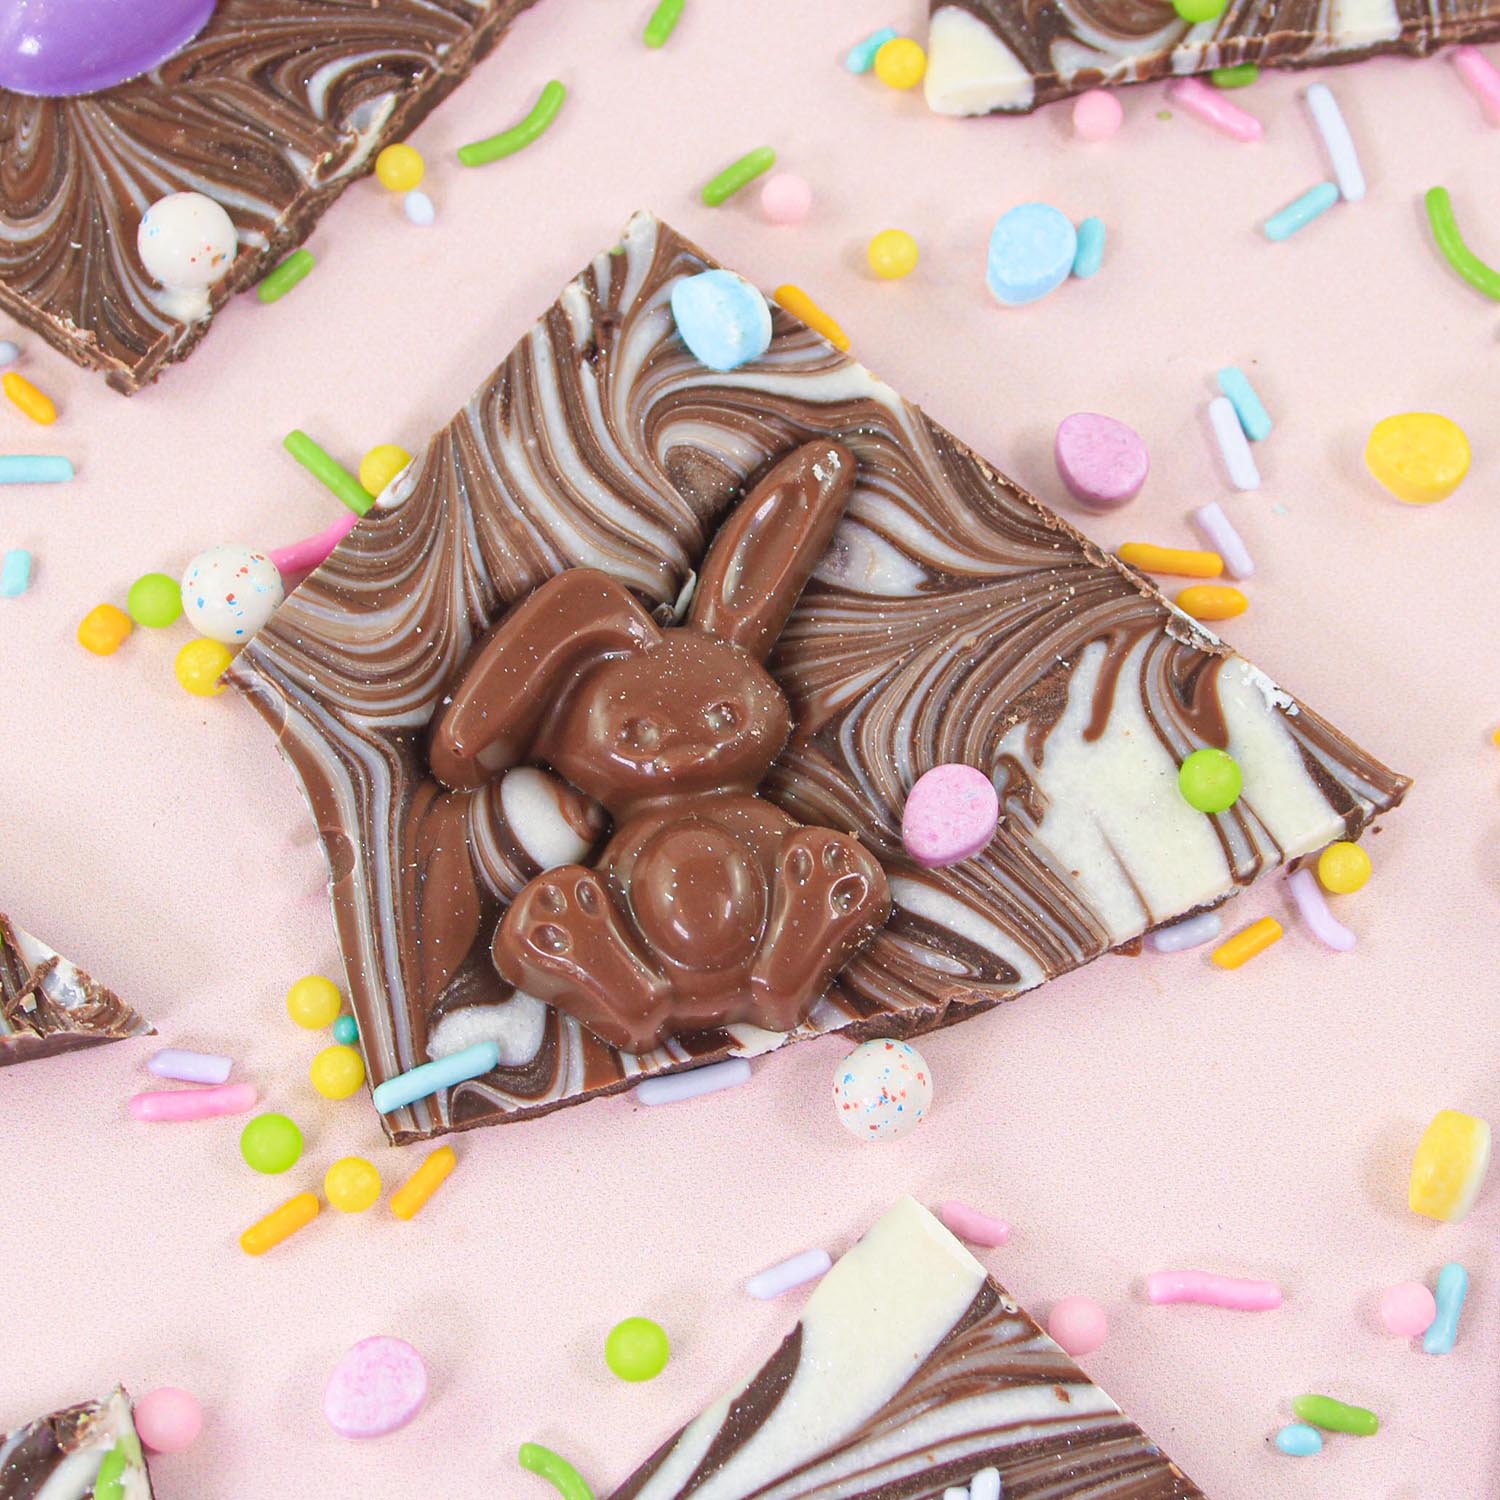 Finished piece of bunny chocolate bark